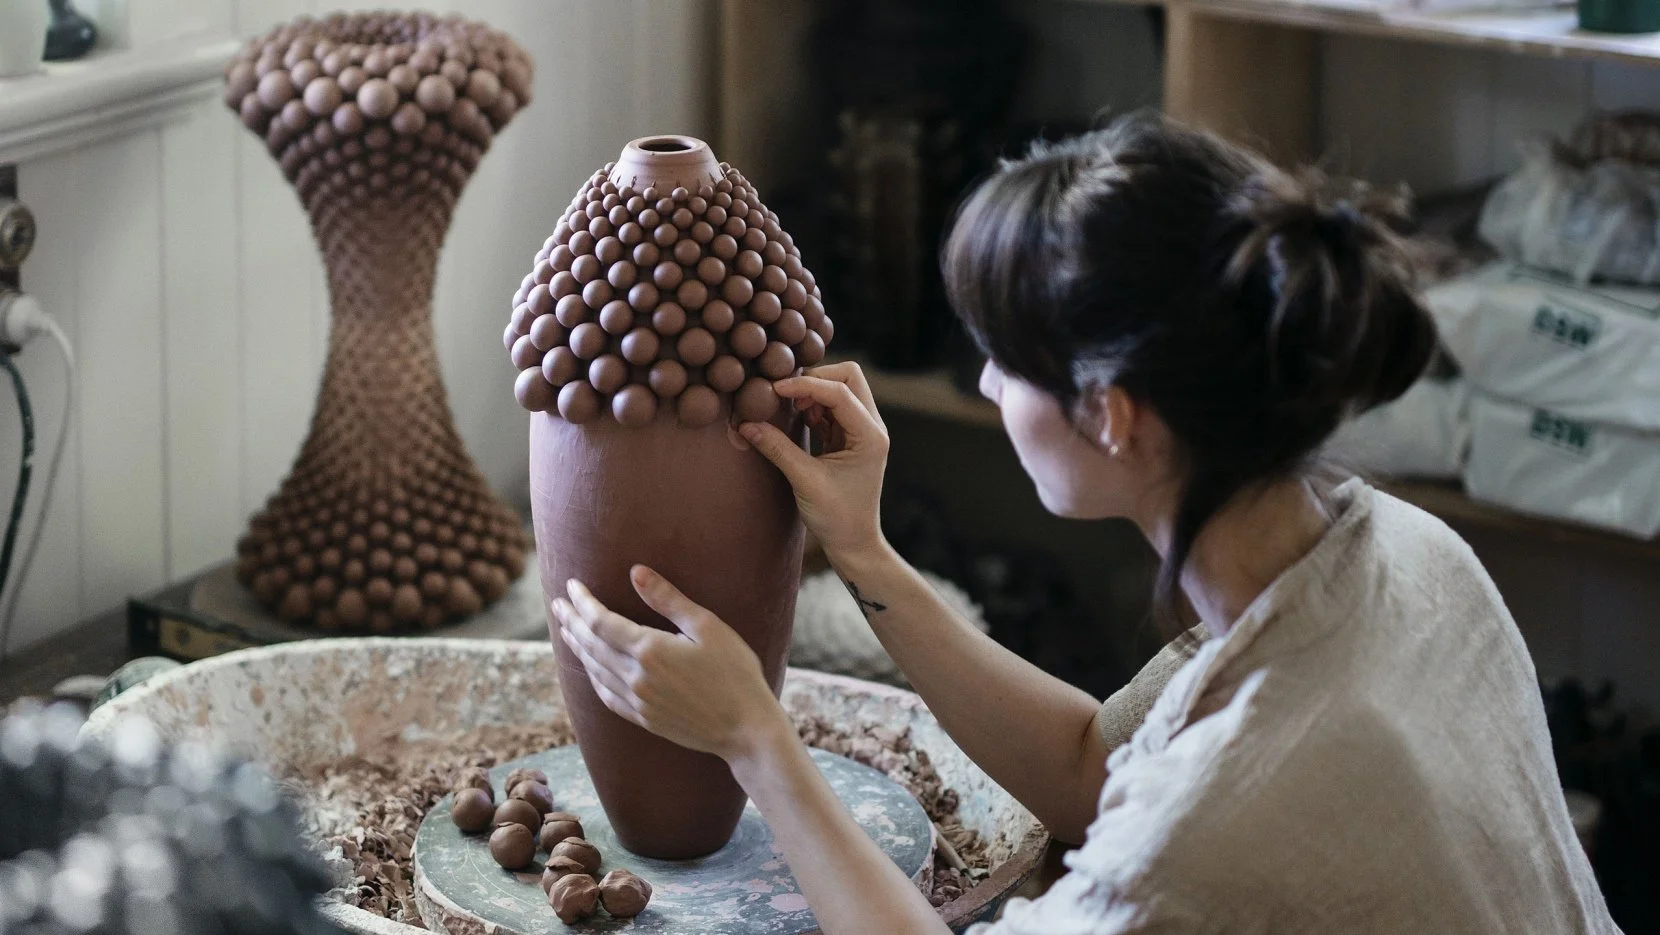 Clay for sculpting, pottery and jewellery